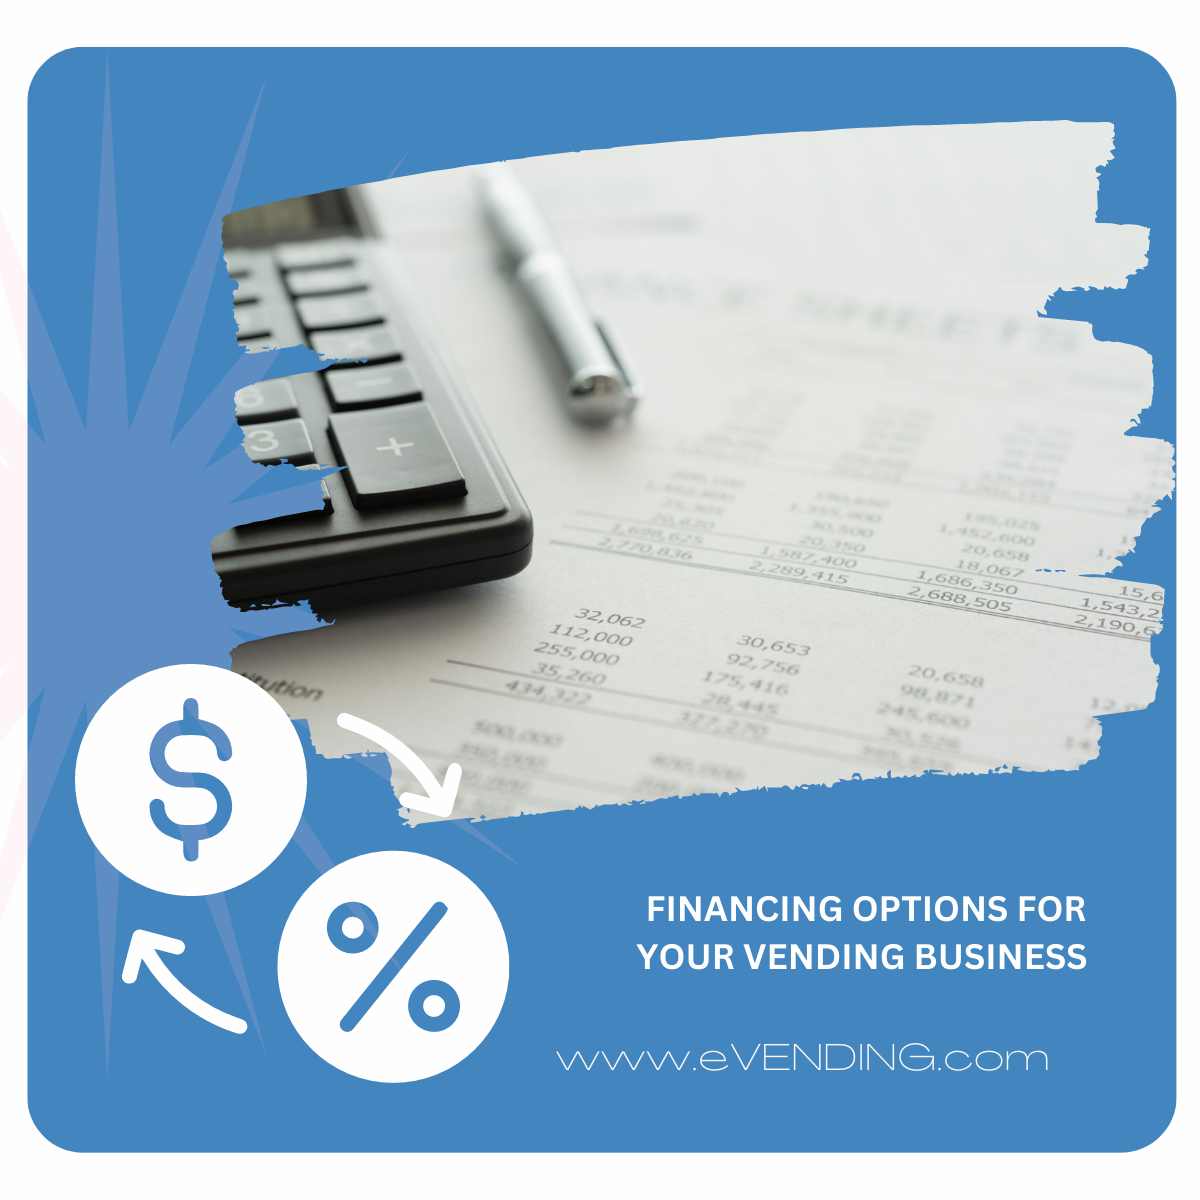 FINANCING OPTIONS FOR YOUR VENDING BUSINESS – AN OVERVIEW